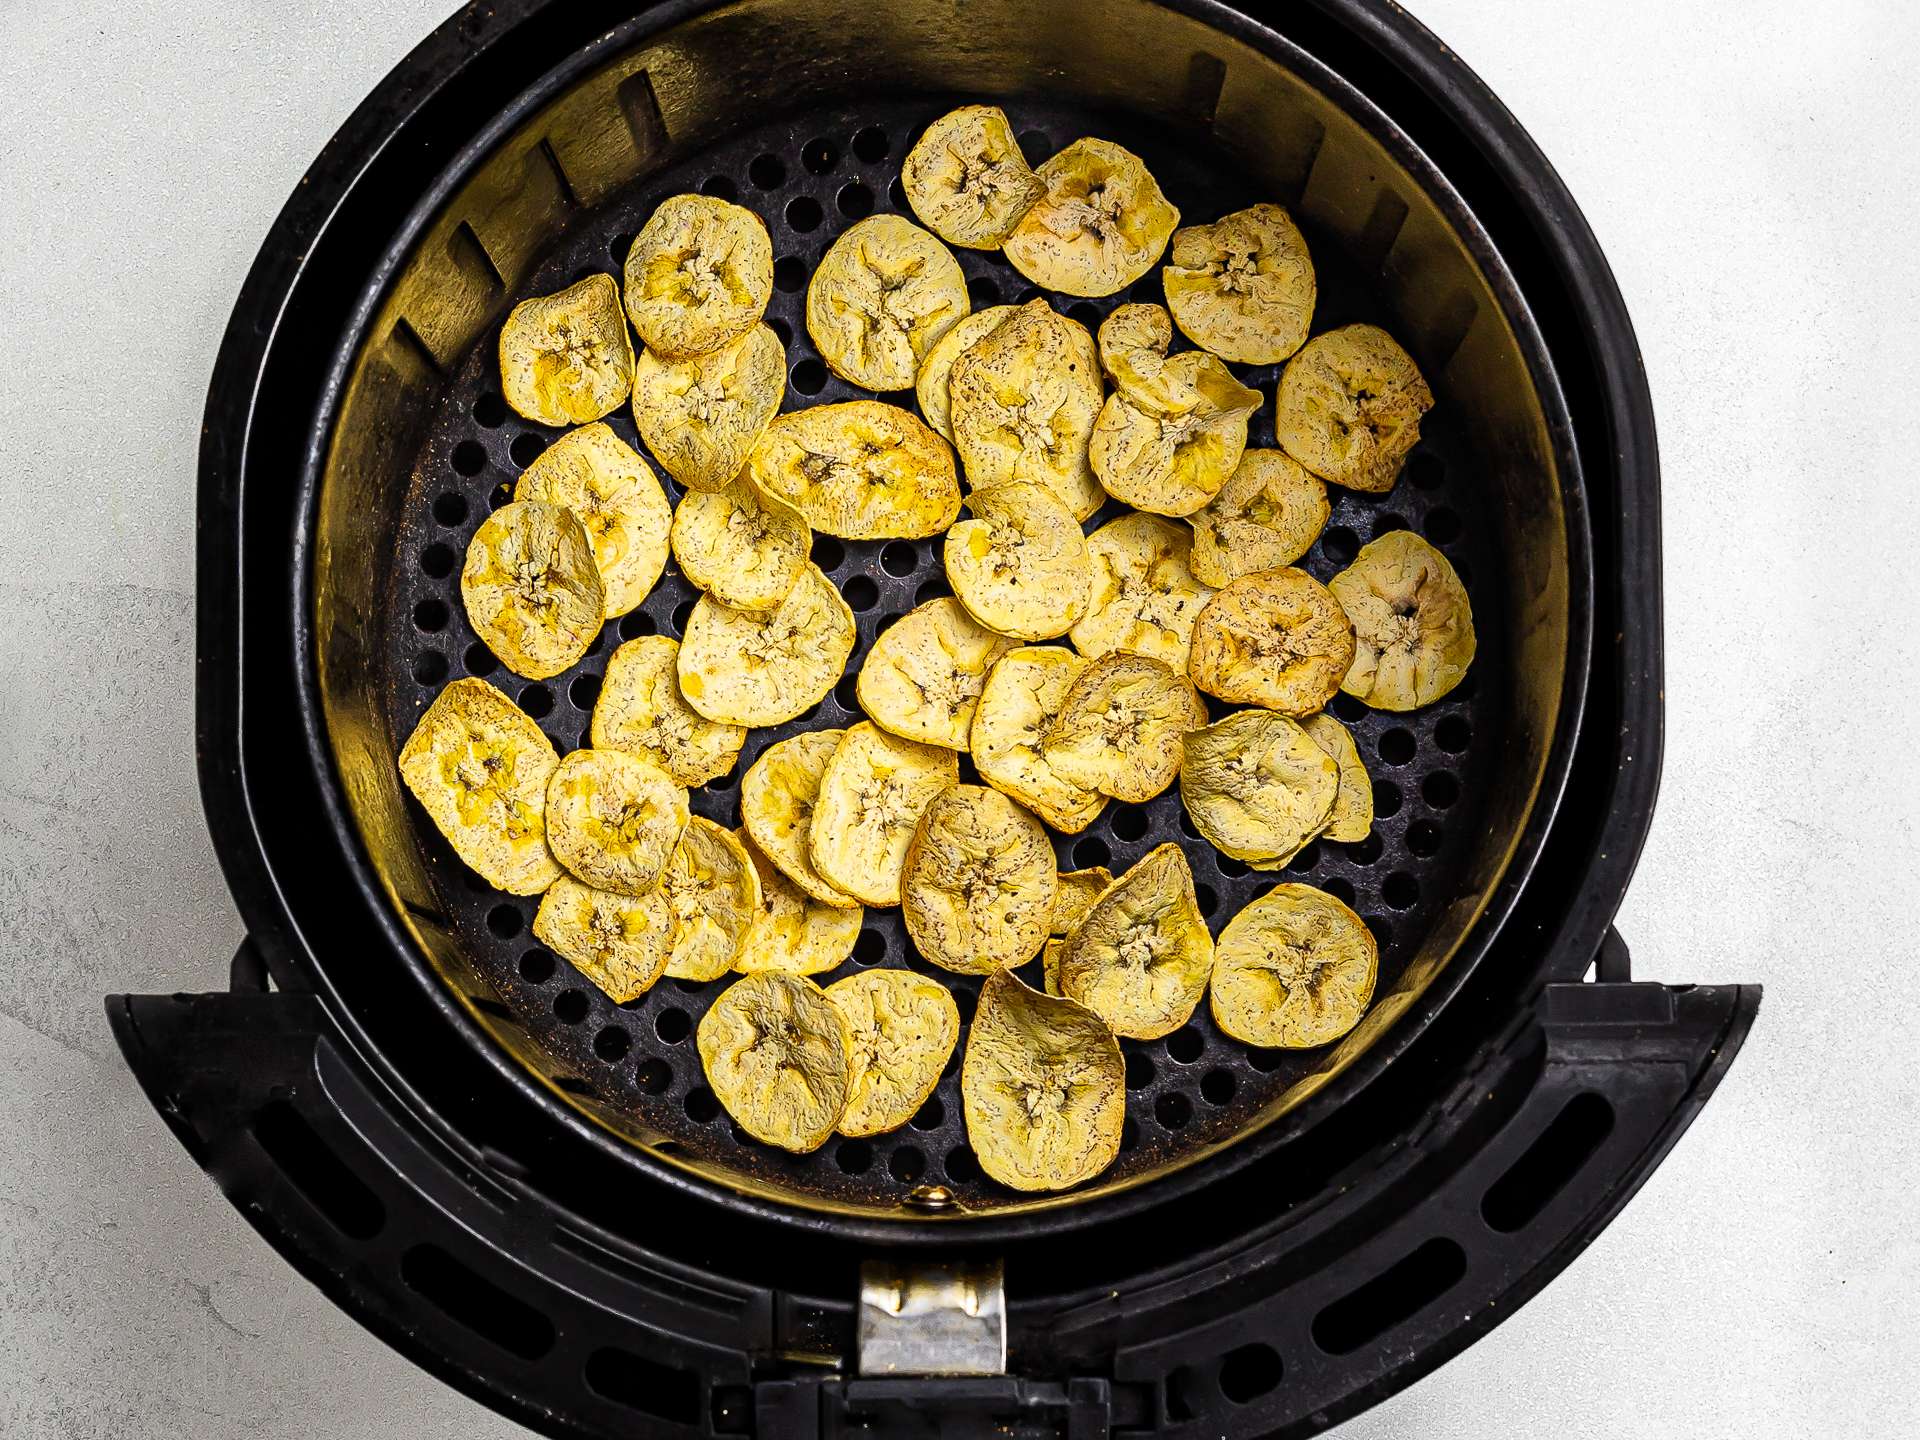 5 Healthy Air Fryer Recipes to Cut Back on Fats